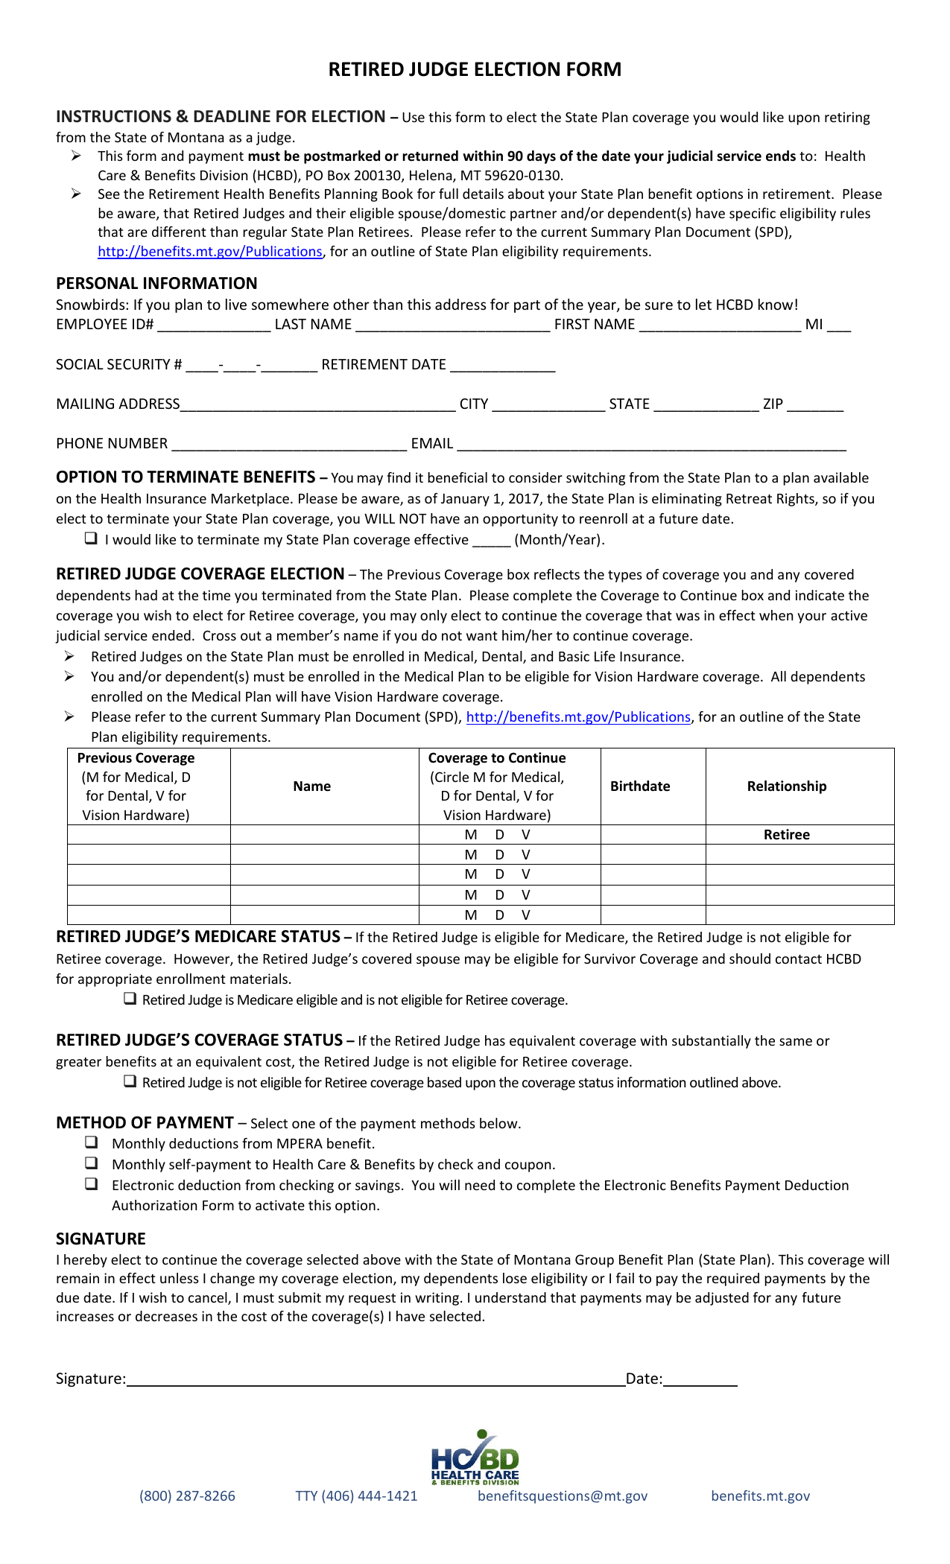 Retired Judge Election Form - Montana, Page 1